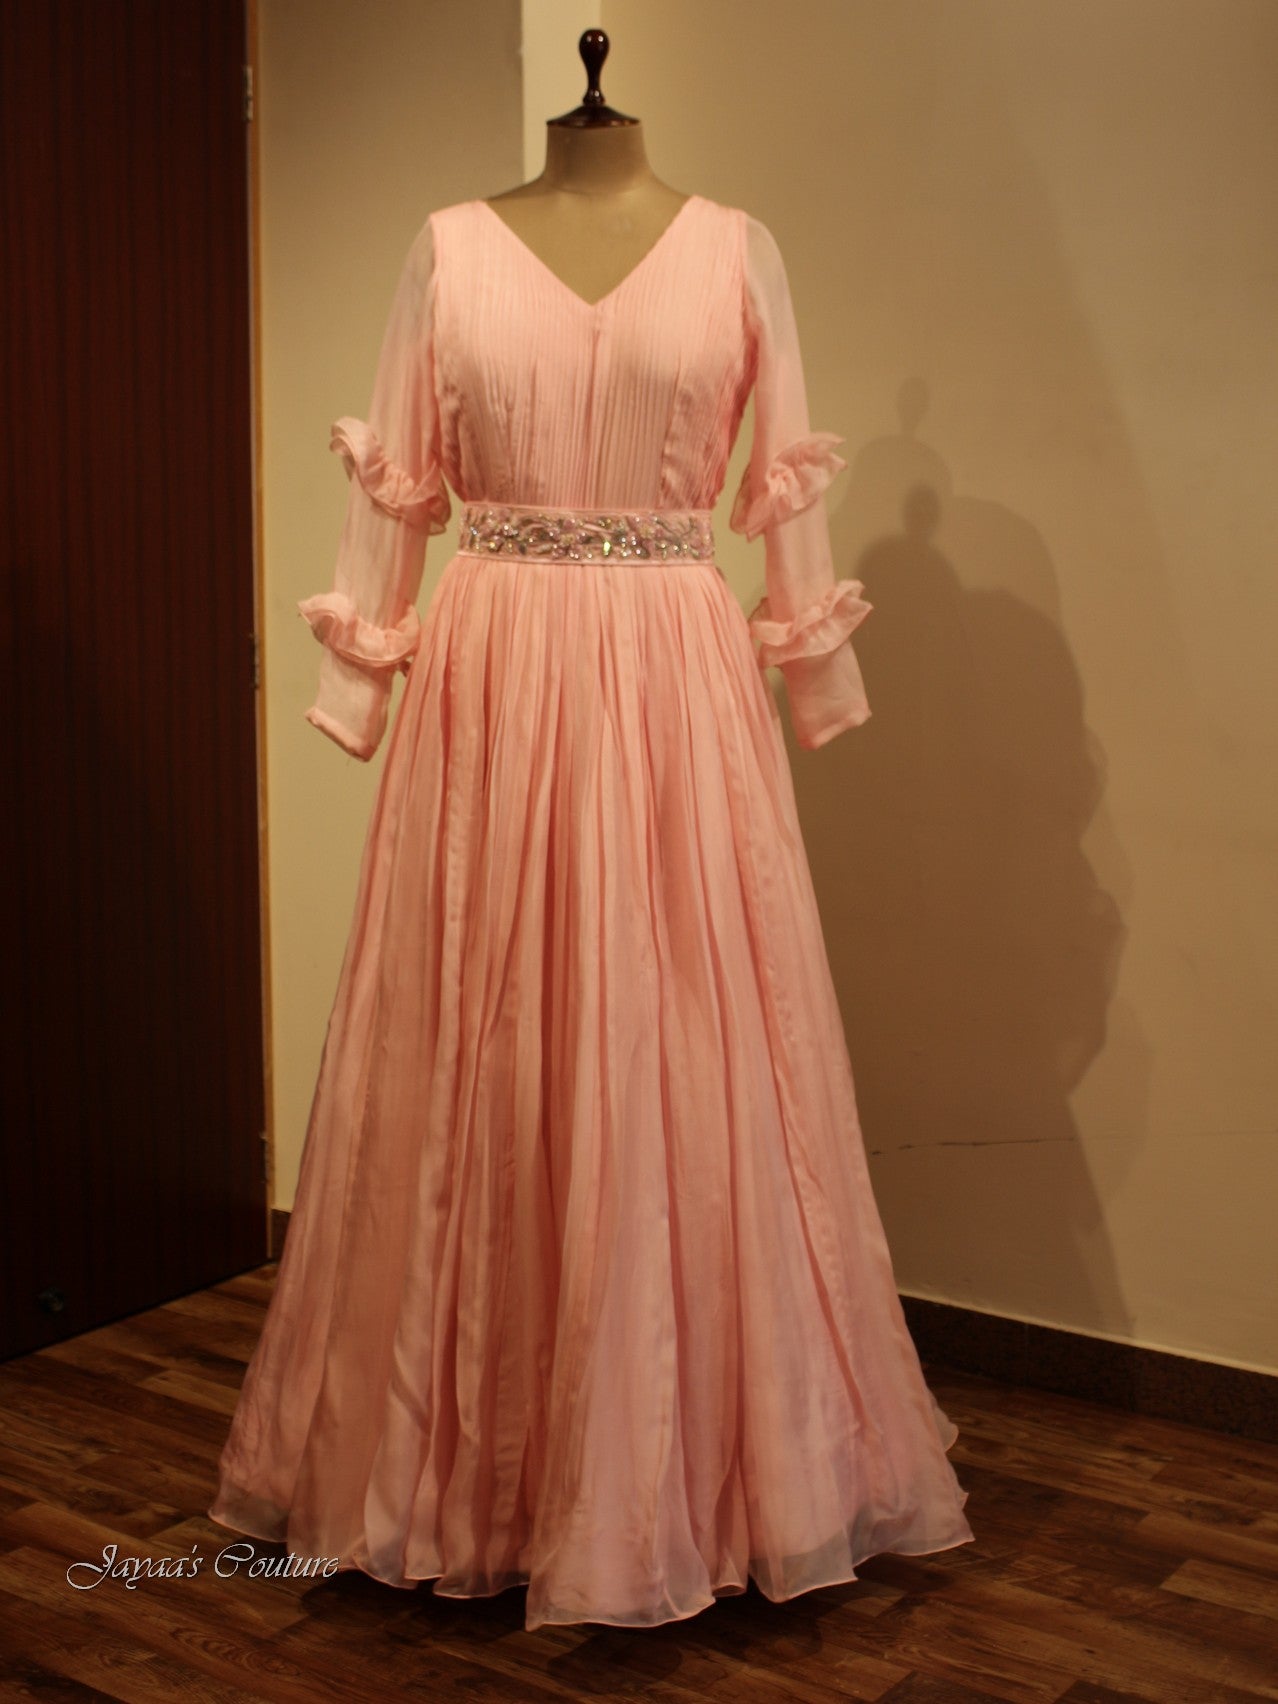 Blush pink Pleted gown with belt